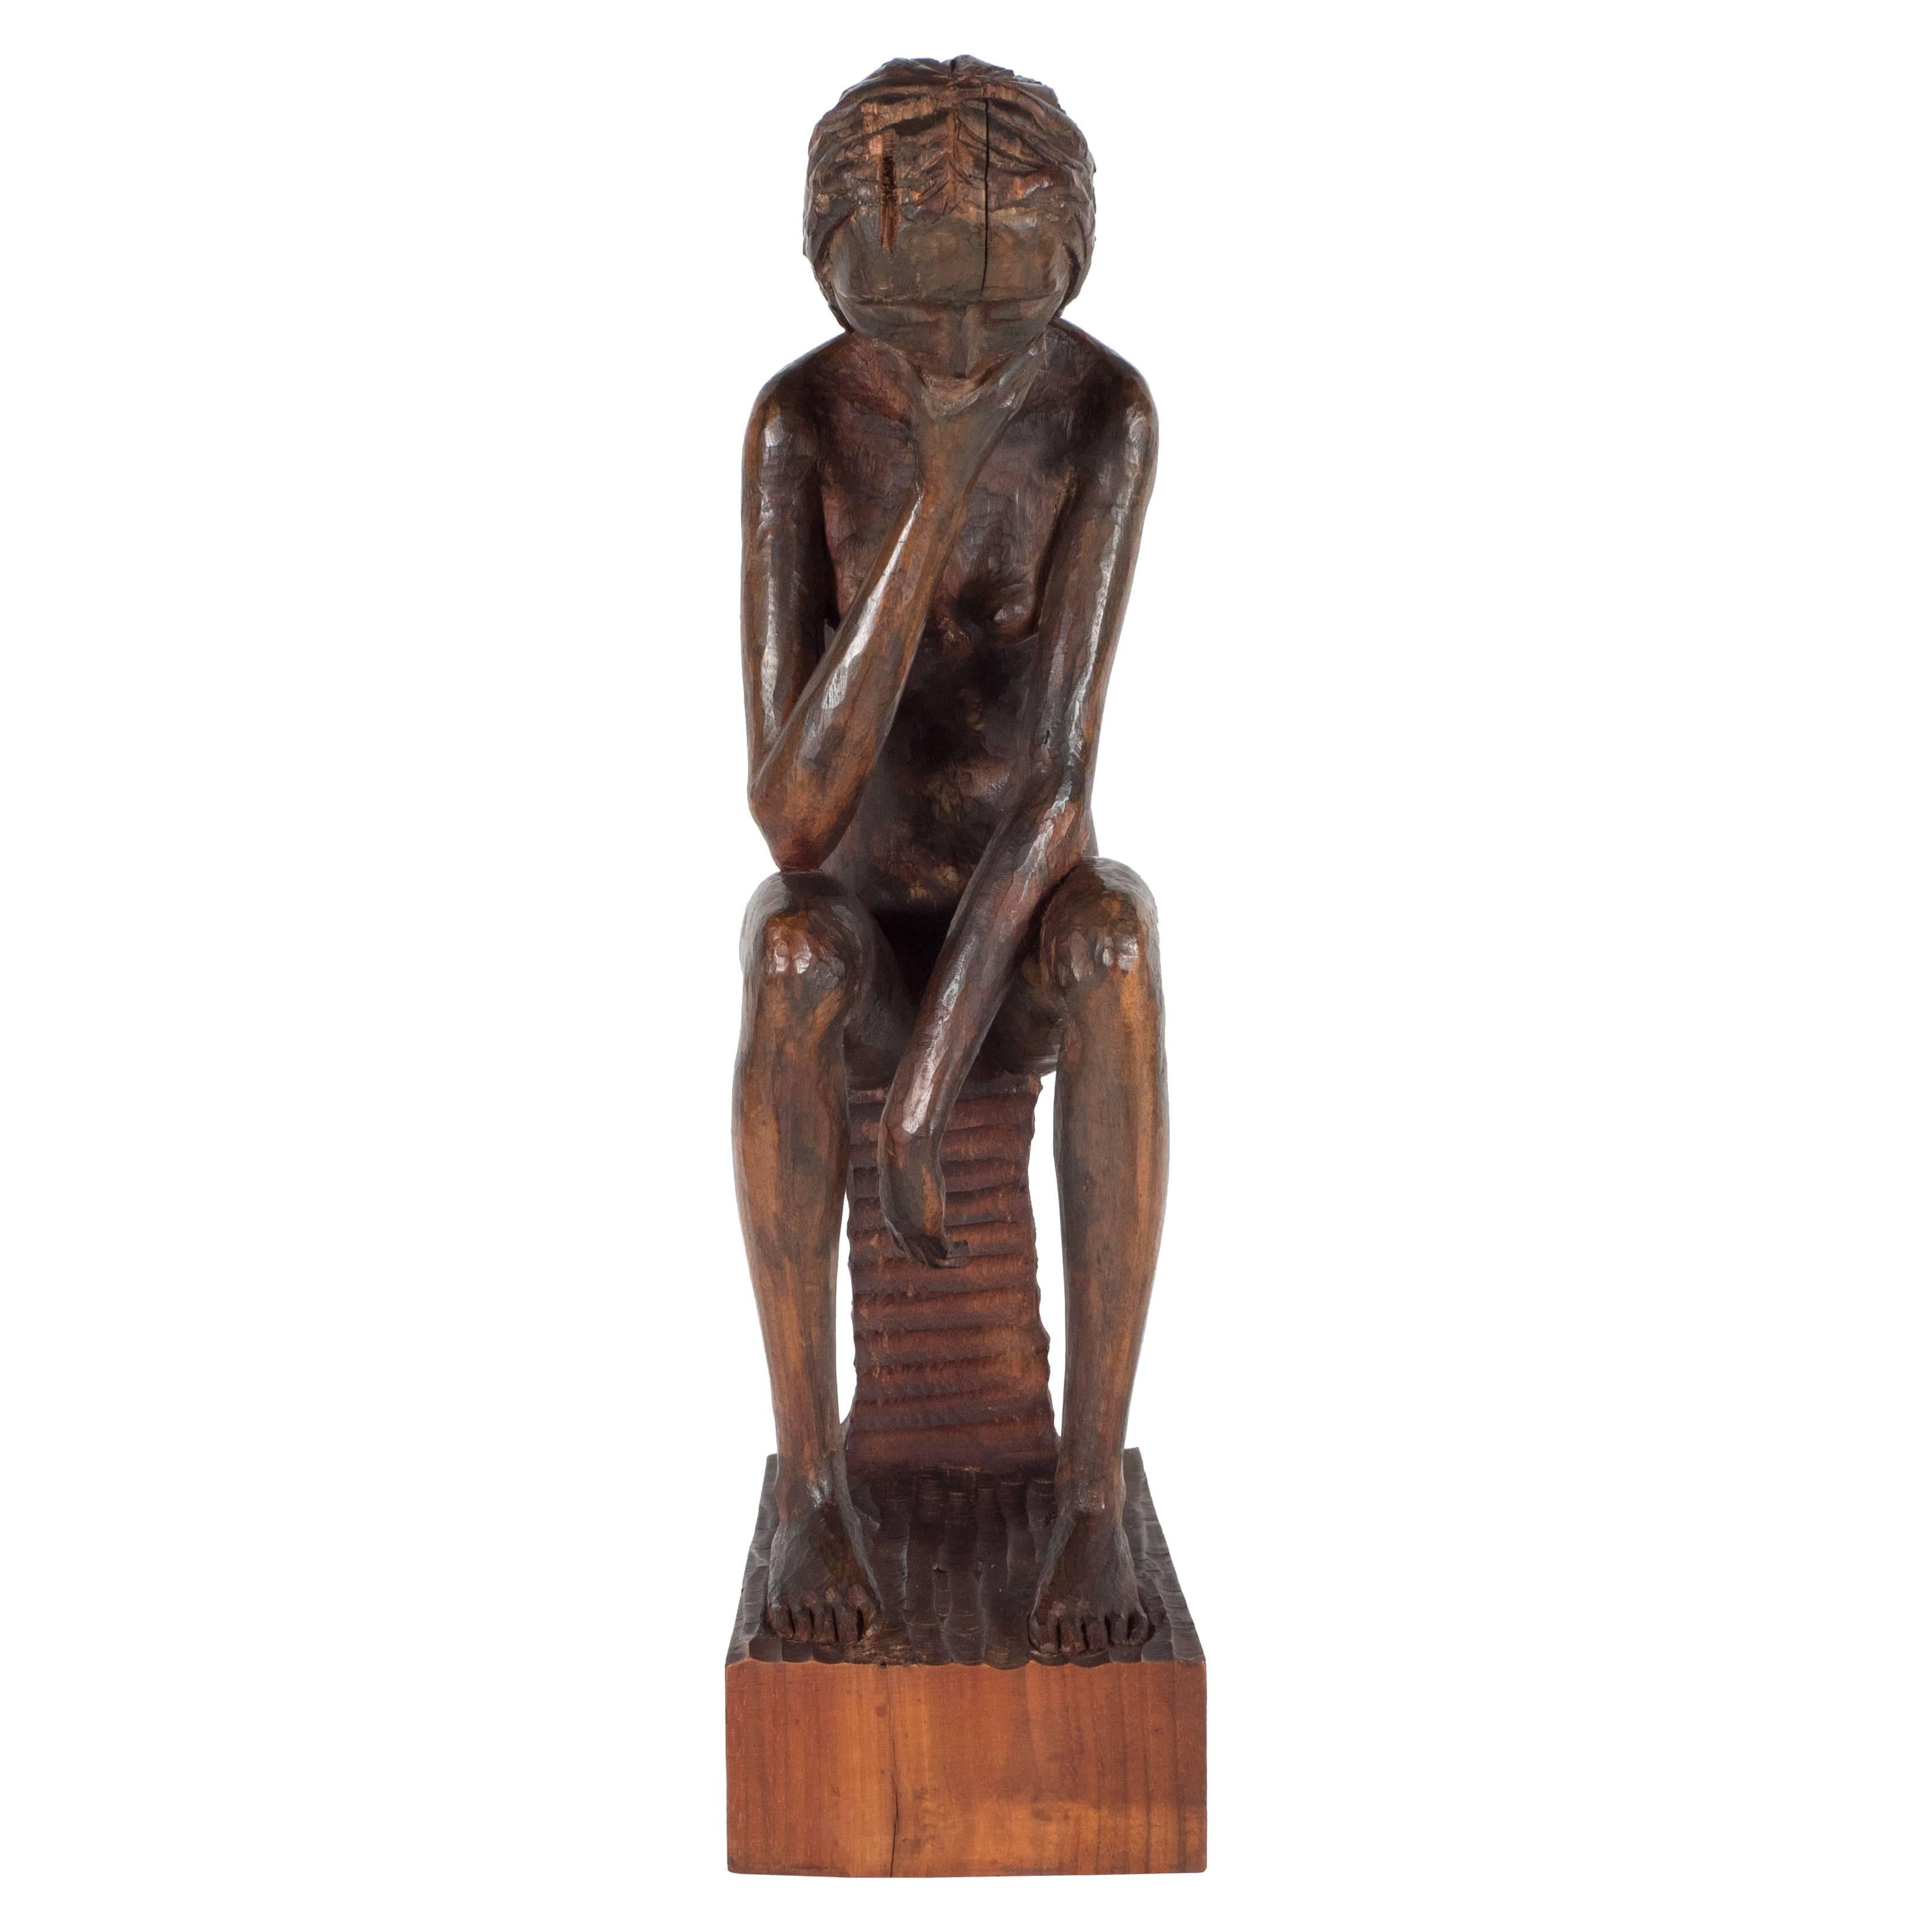 Hand-carved wood sculpture of a seated contemplative woman by an unknown artist.
Seated woman on a rectangular plinth
wood.
Measures: 17